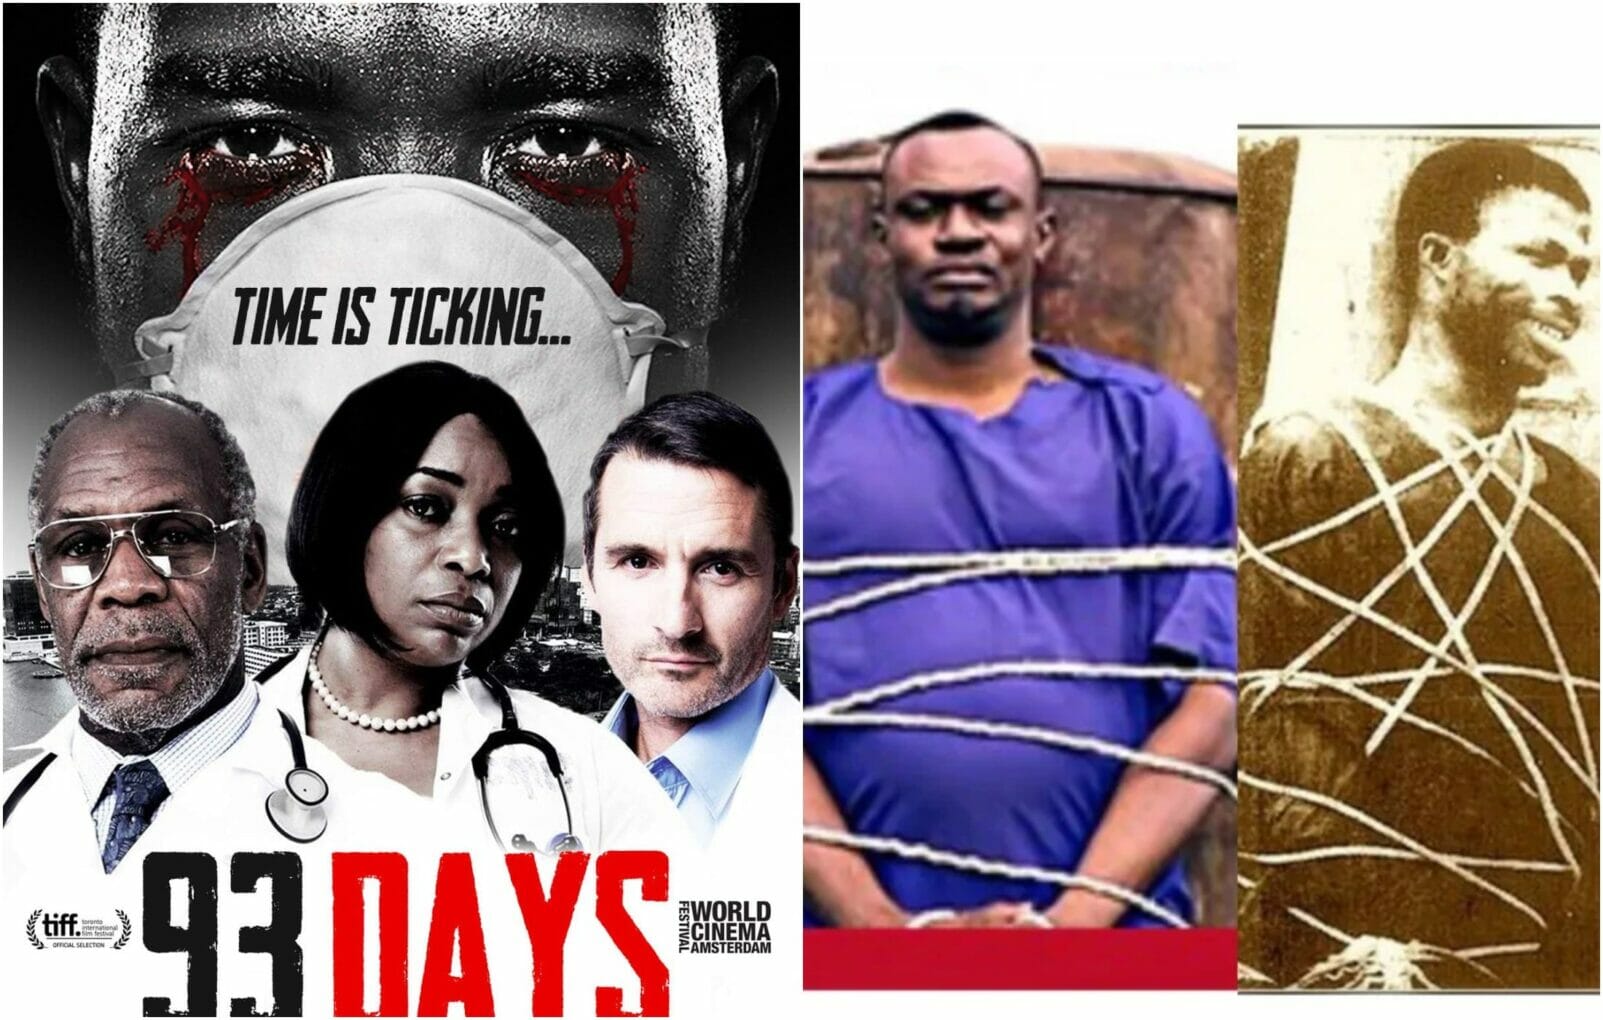 Nollywood movies that were based on true stories